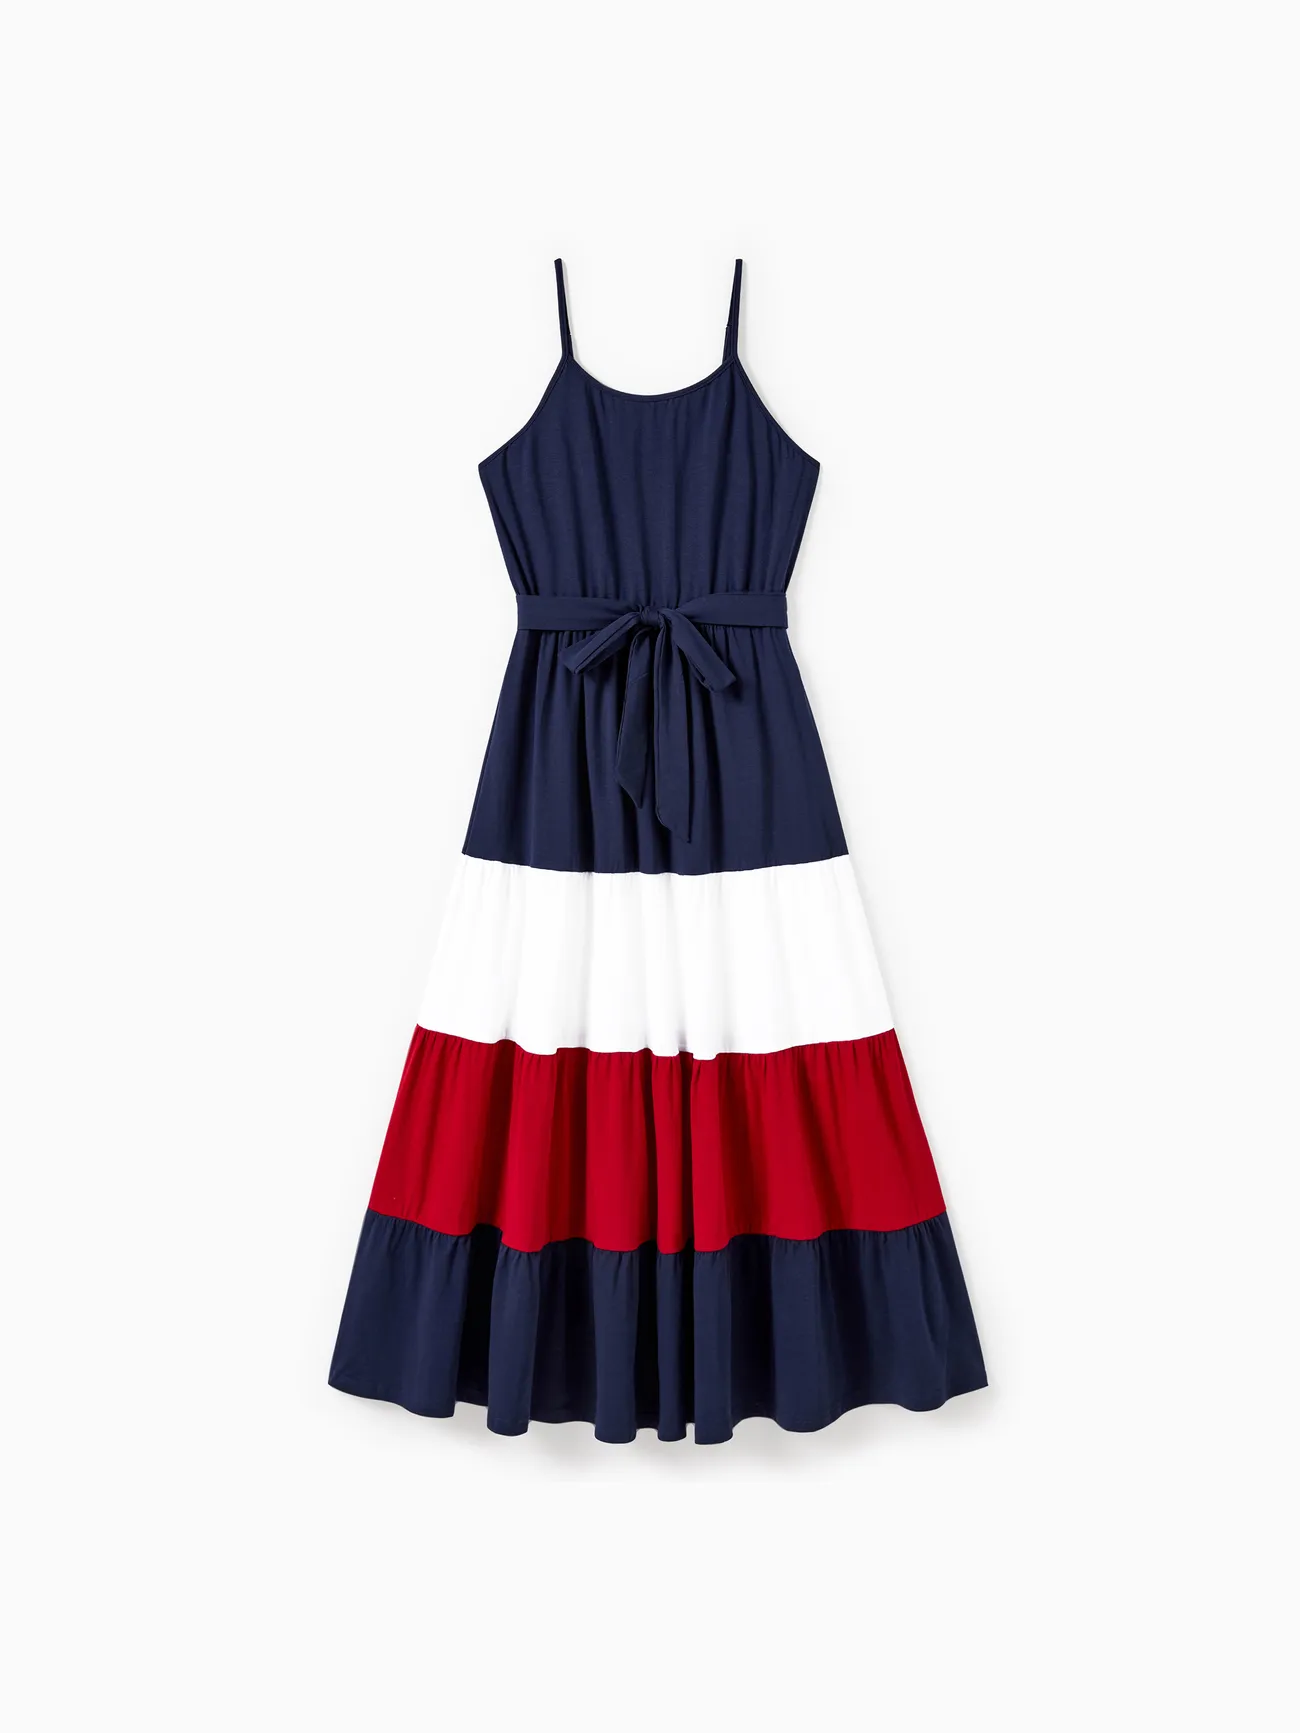 Family Matching Color Block Tee and Strap Belted A-Line Pleated Ruffle Hem Dress Sets MultiColour big image 1